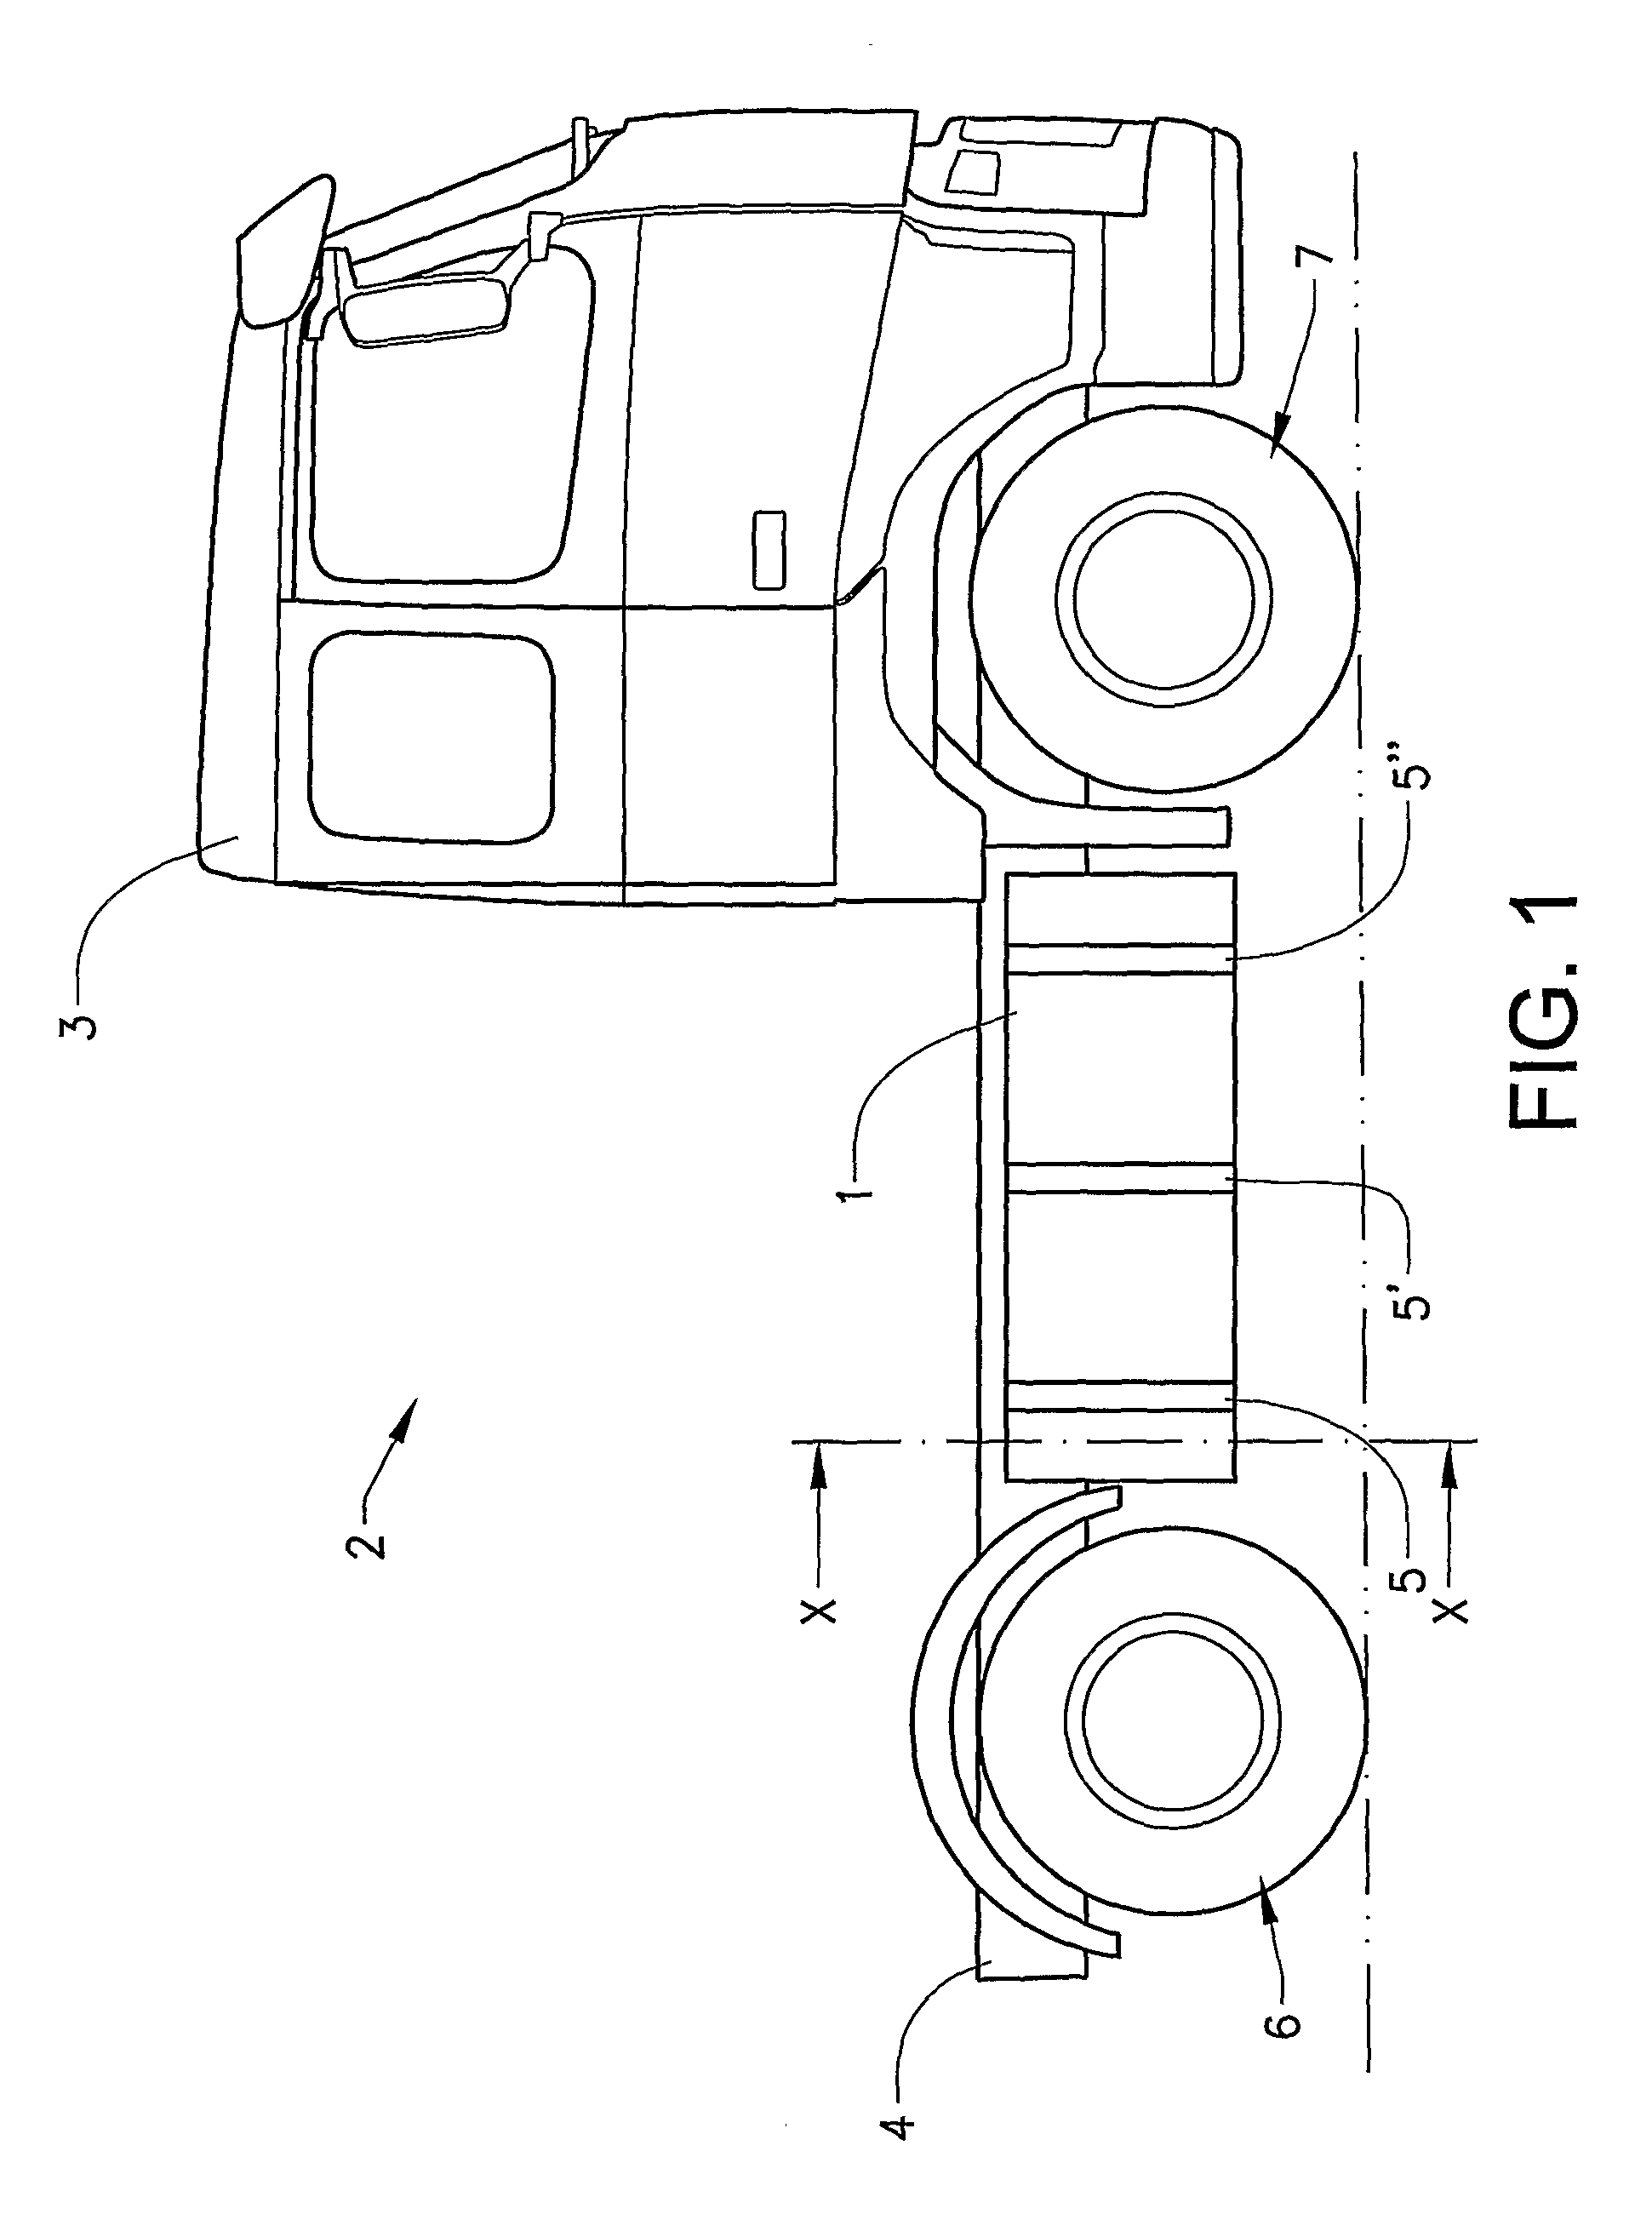 Device for use with liquid container for a vehicle and method for mounting said liquid container